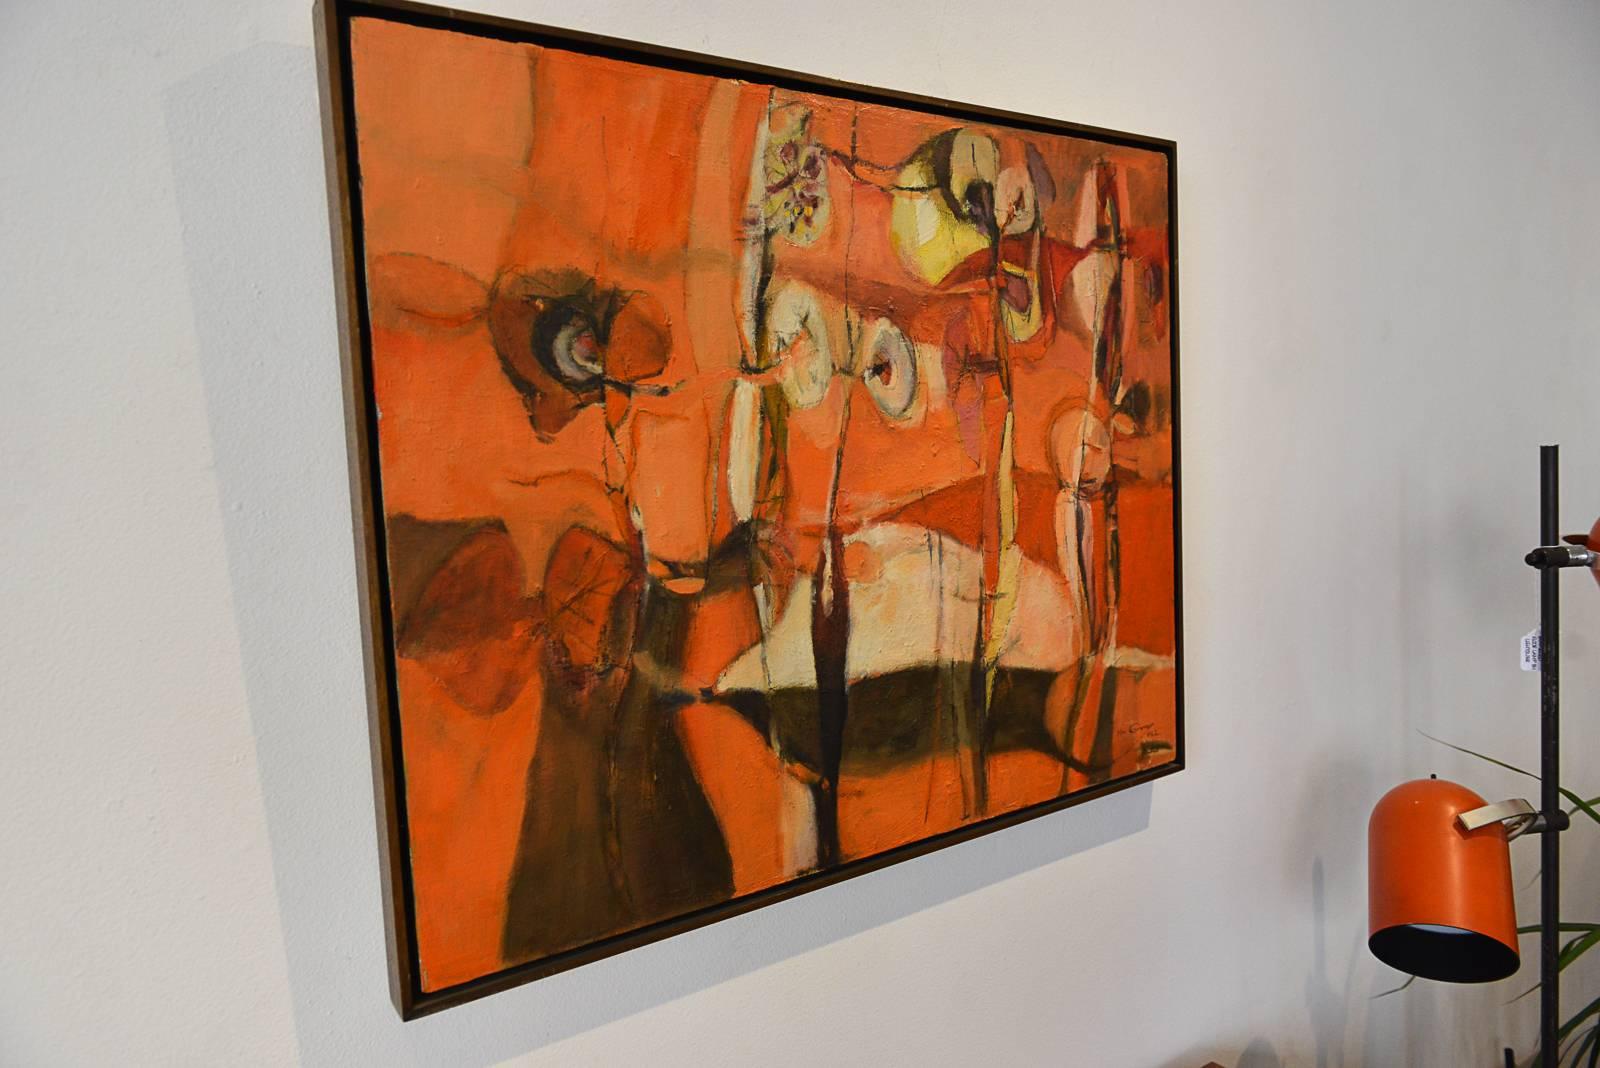 Colorful original oil on canvas modernist expressionistic painting by artist Mai Onno, 1962. Excellent original condition with original floating black wood frame.

Measures: 31